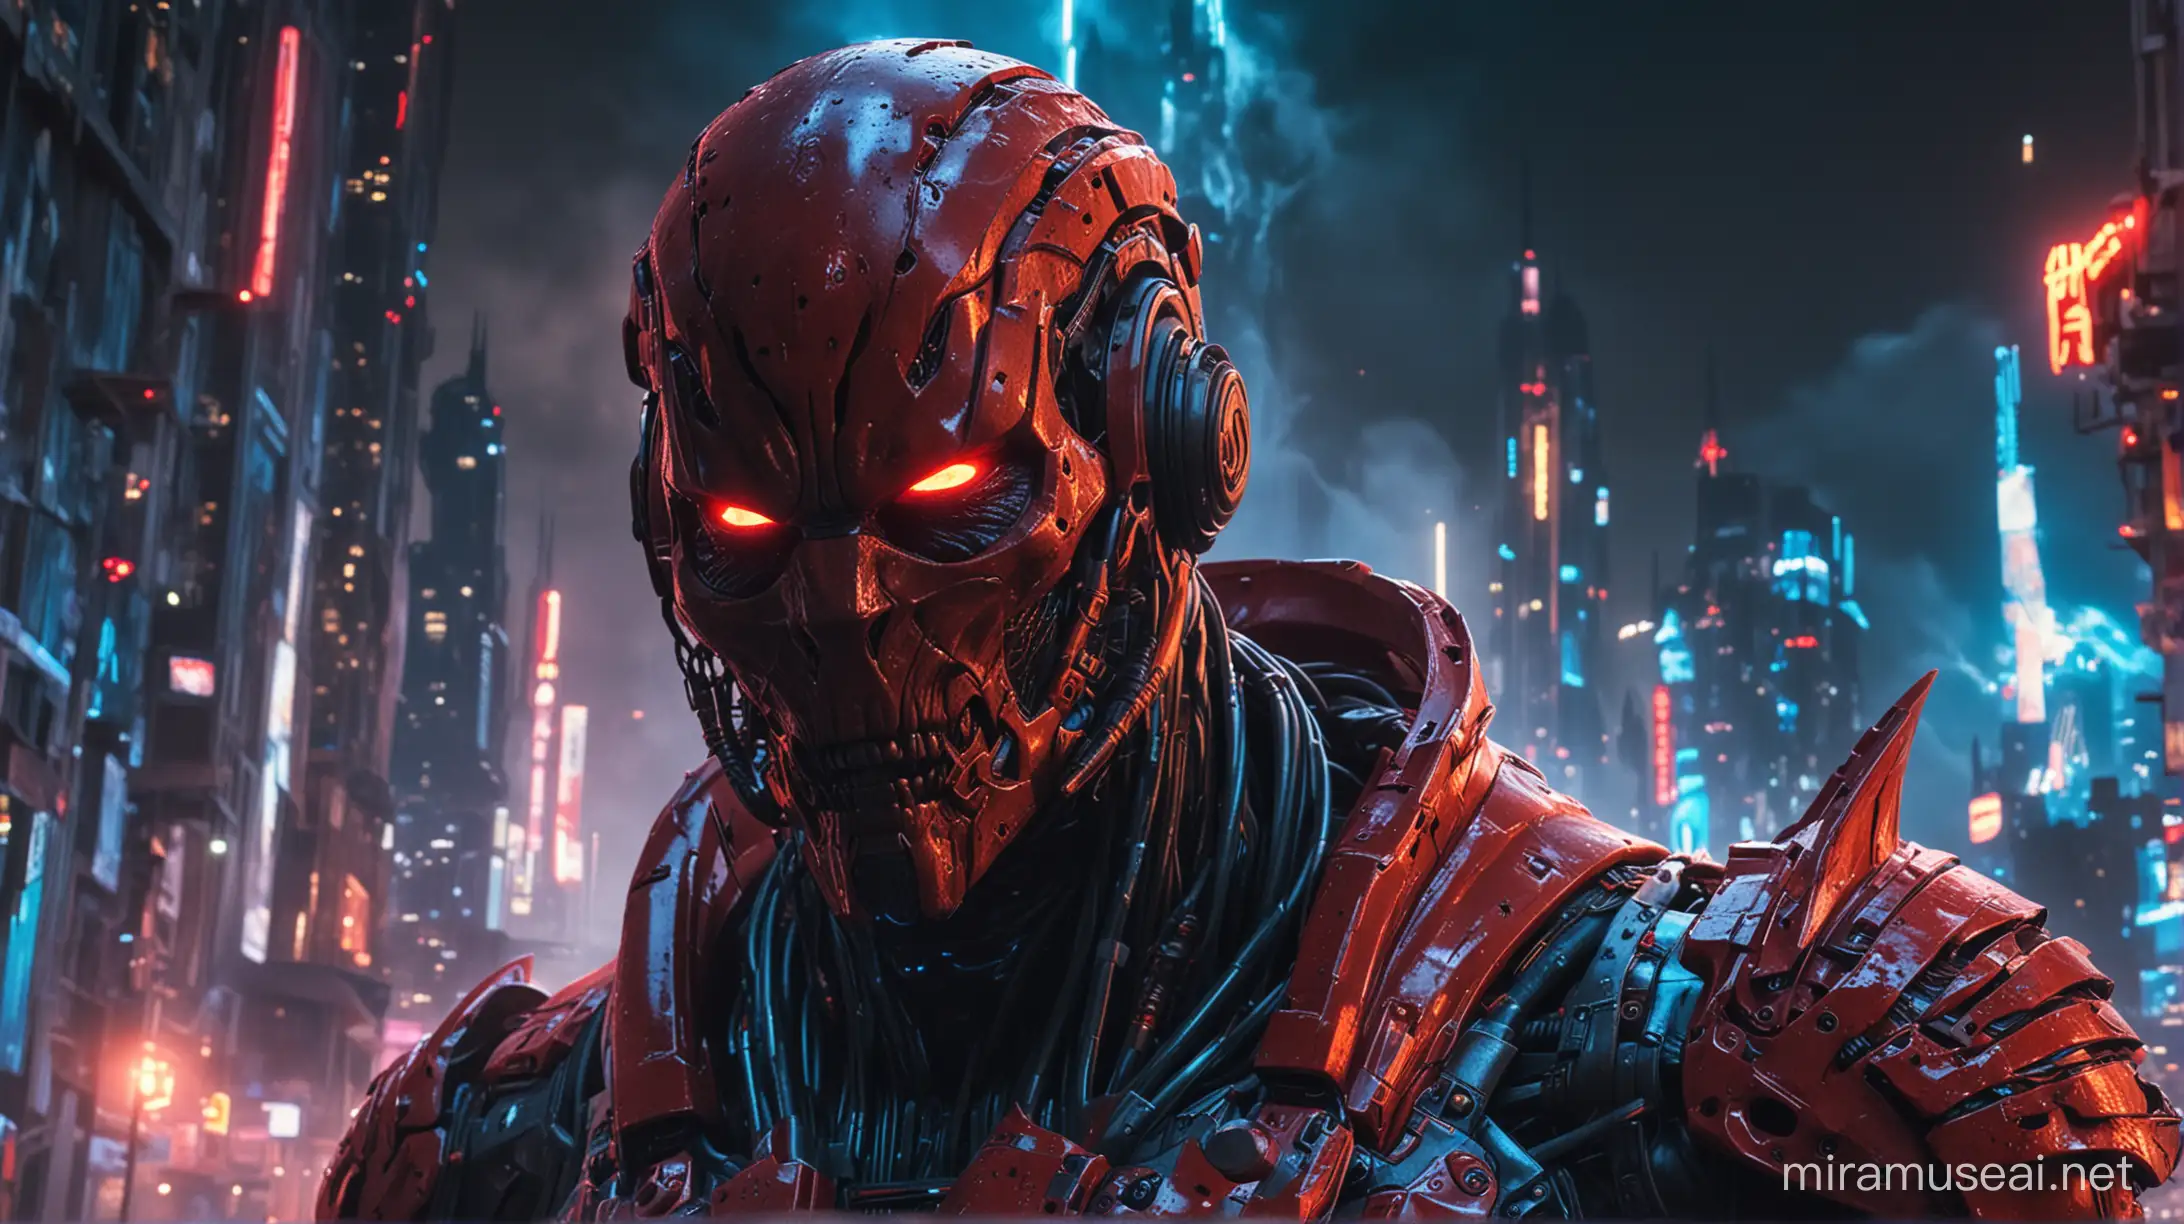 Evil Man with Blood Red Exoskeleton in Neon Futuristic City